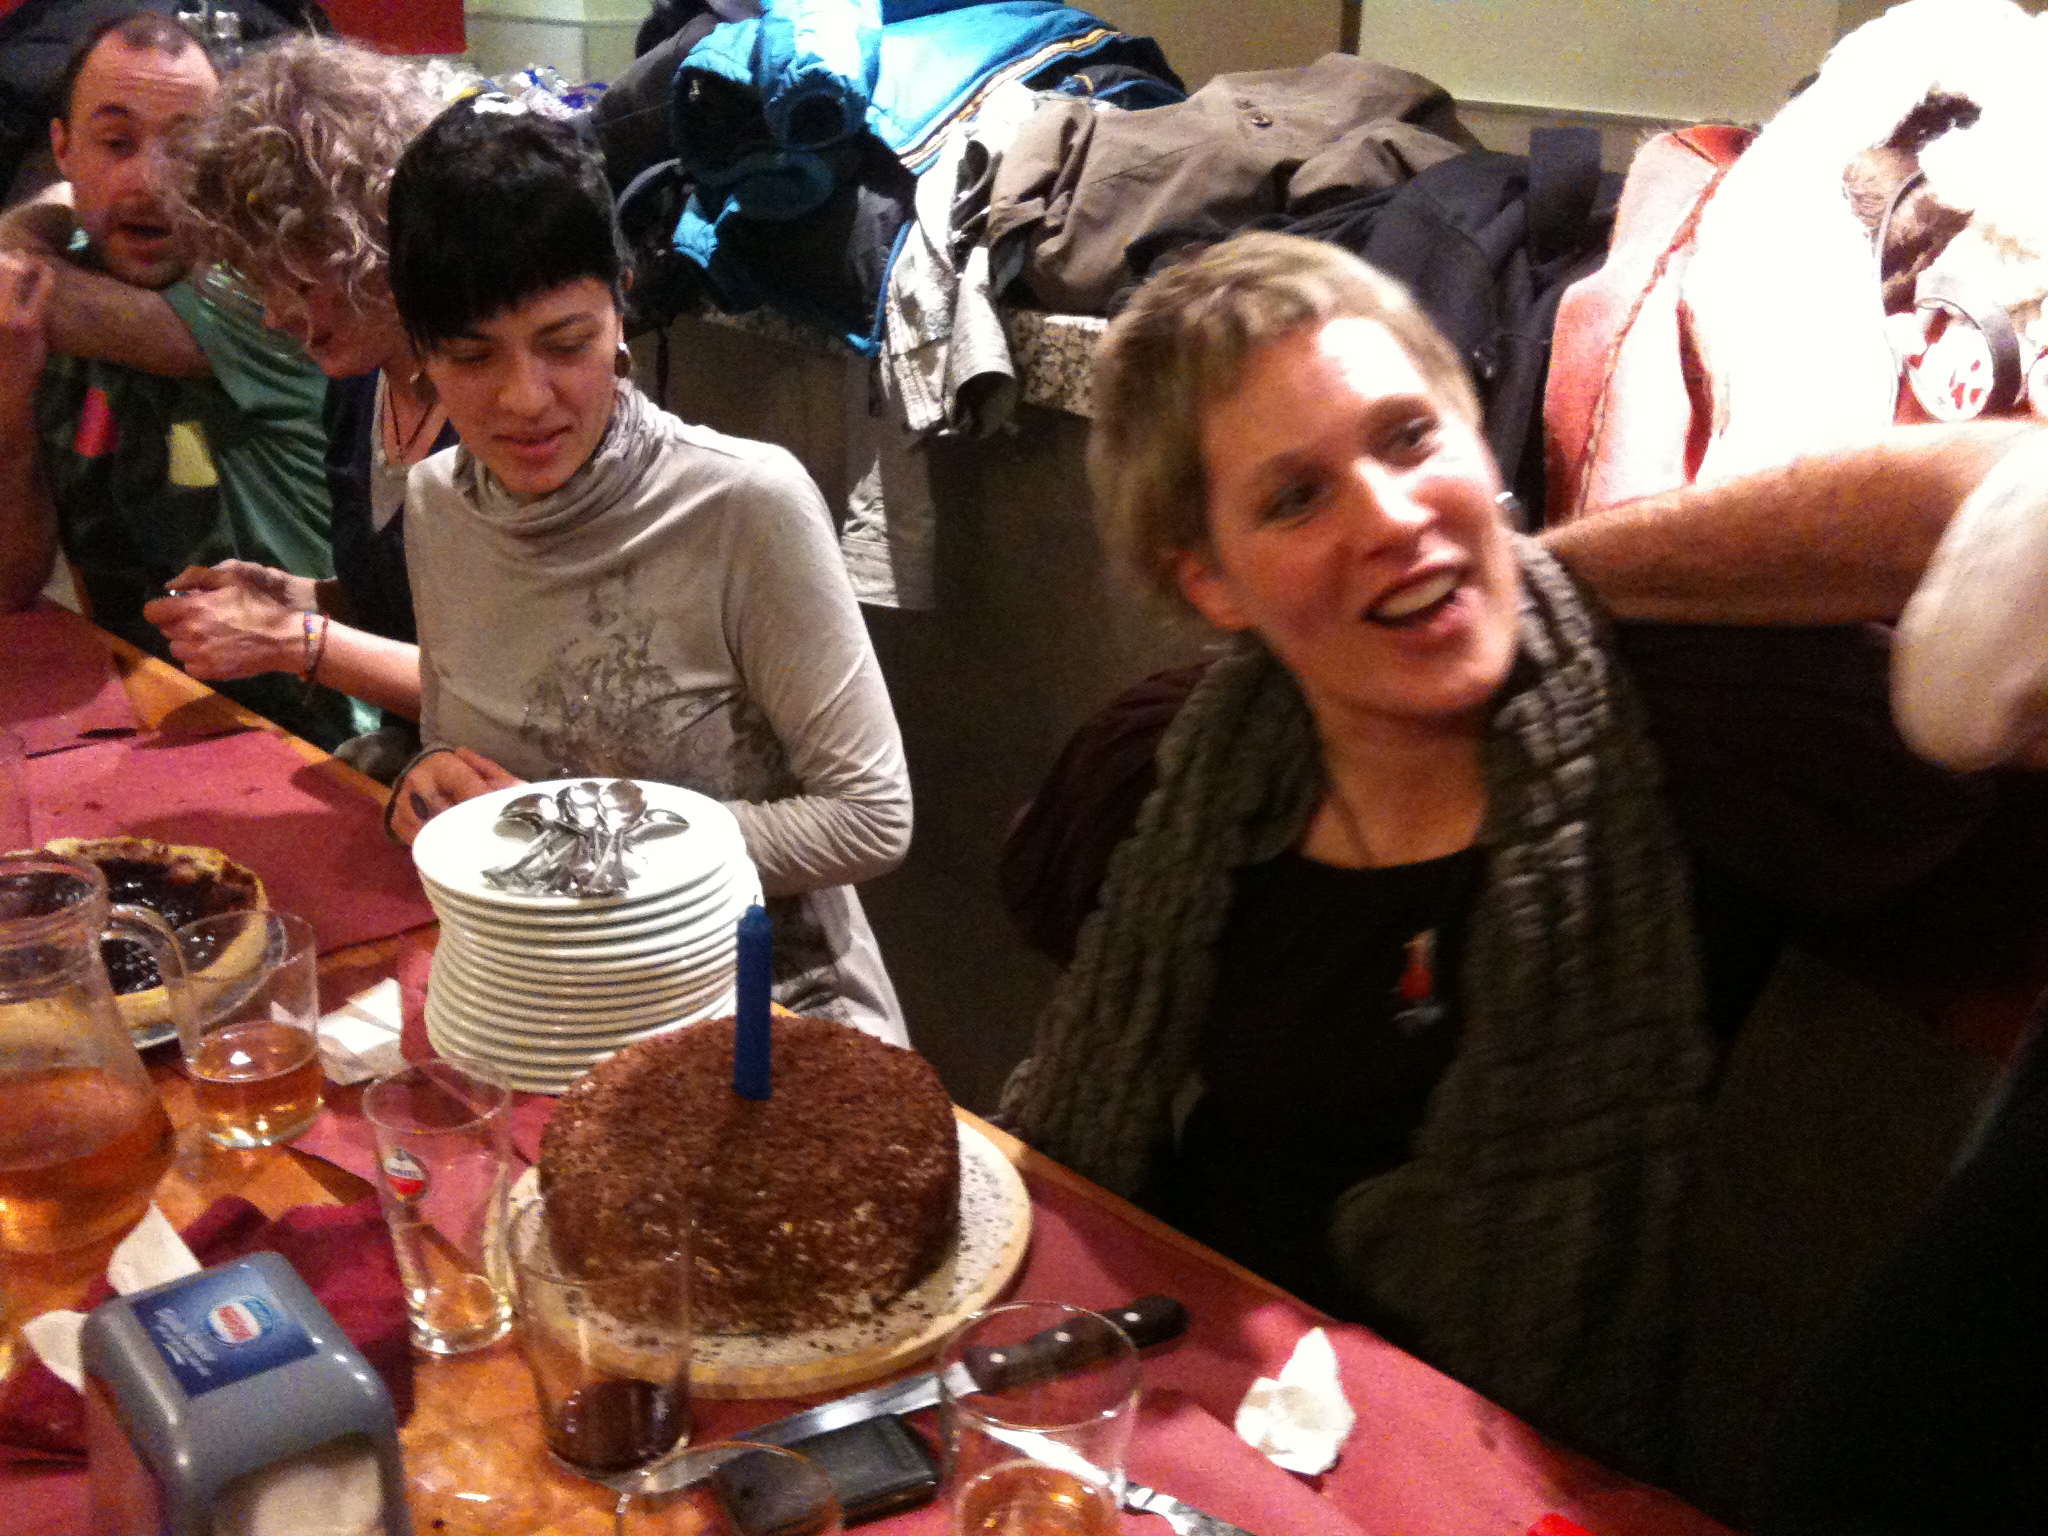 a bunch of people gathered around a table with a cake and candles